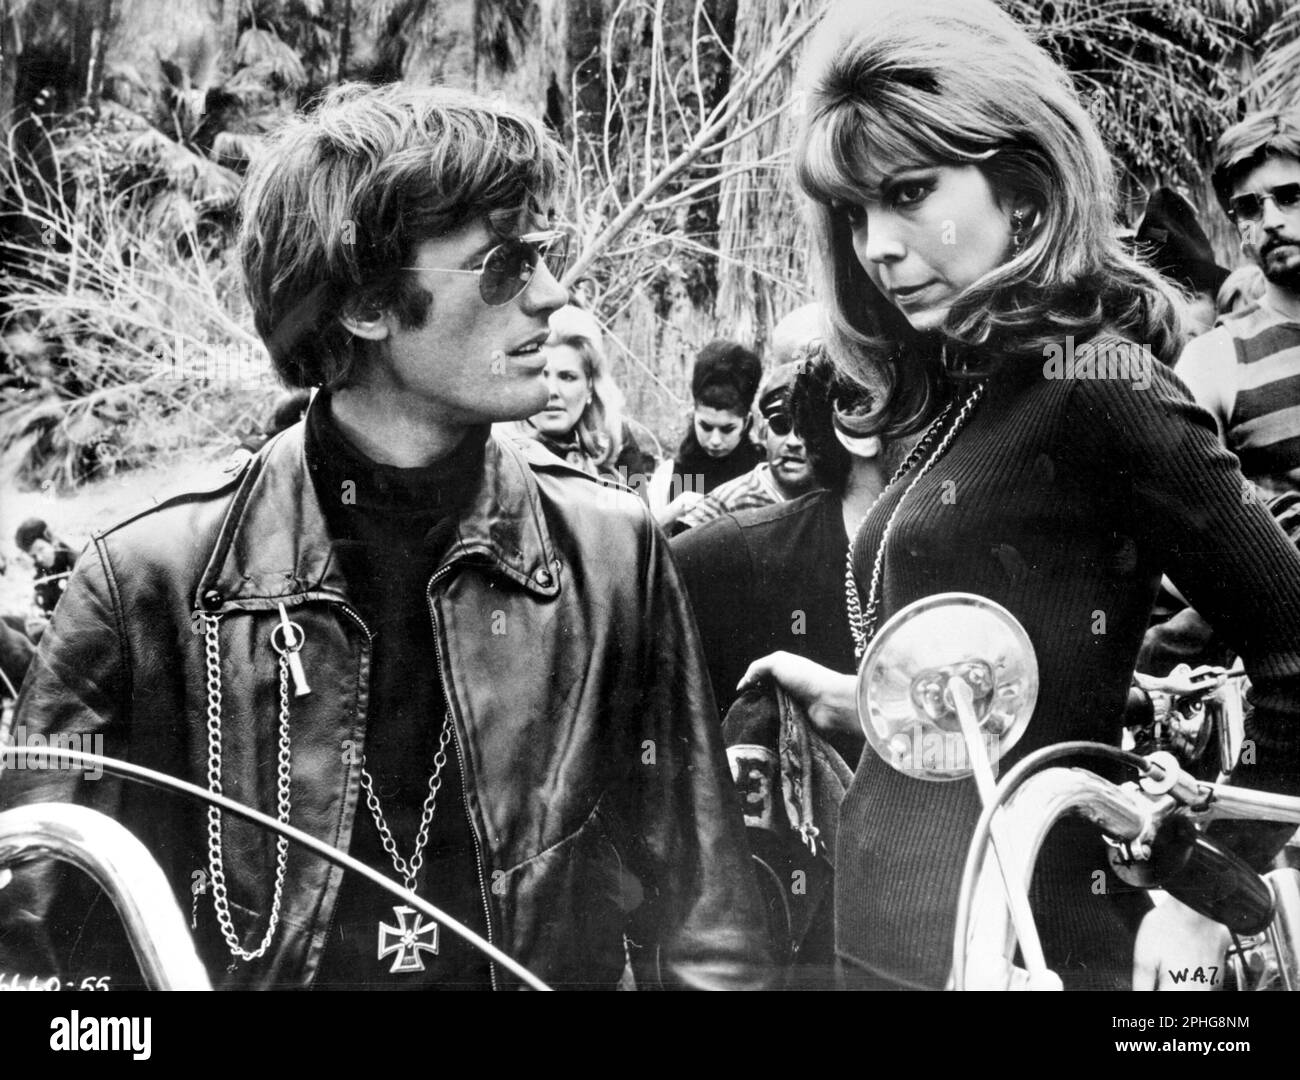 NANCY SINATRA and PETER FONDA in THE WILD ANGELS (1966), directed by ROGER CORMAN. Credit: A.I.P. / Album Stock Photo